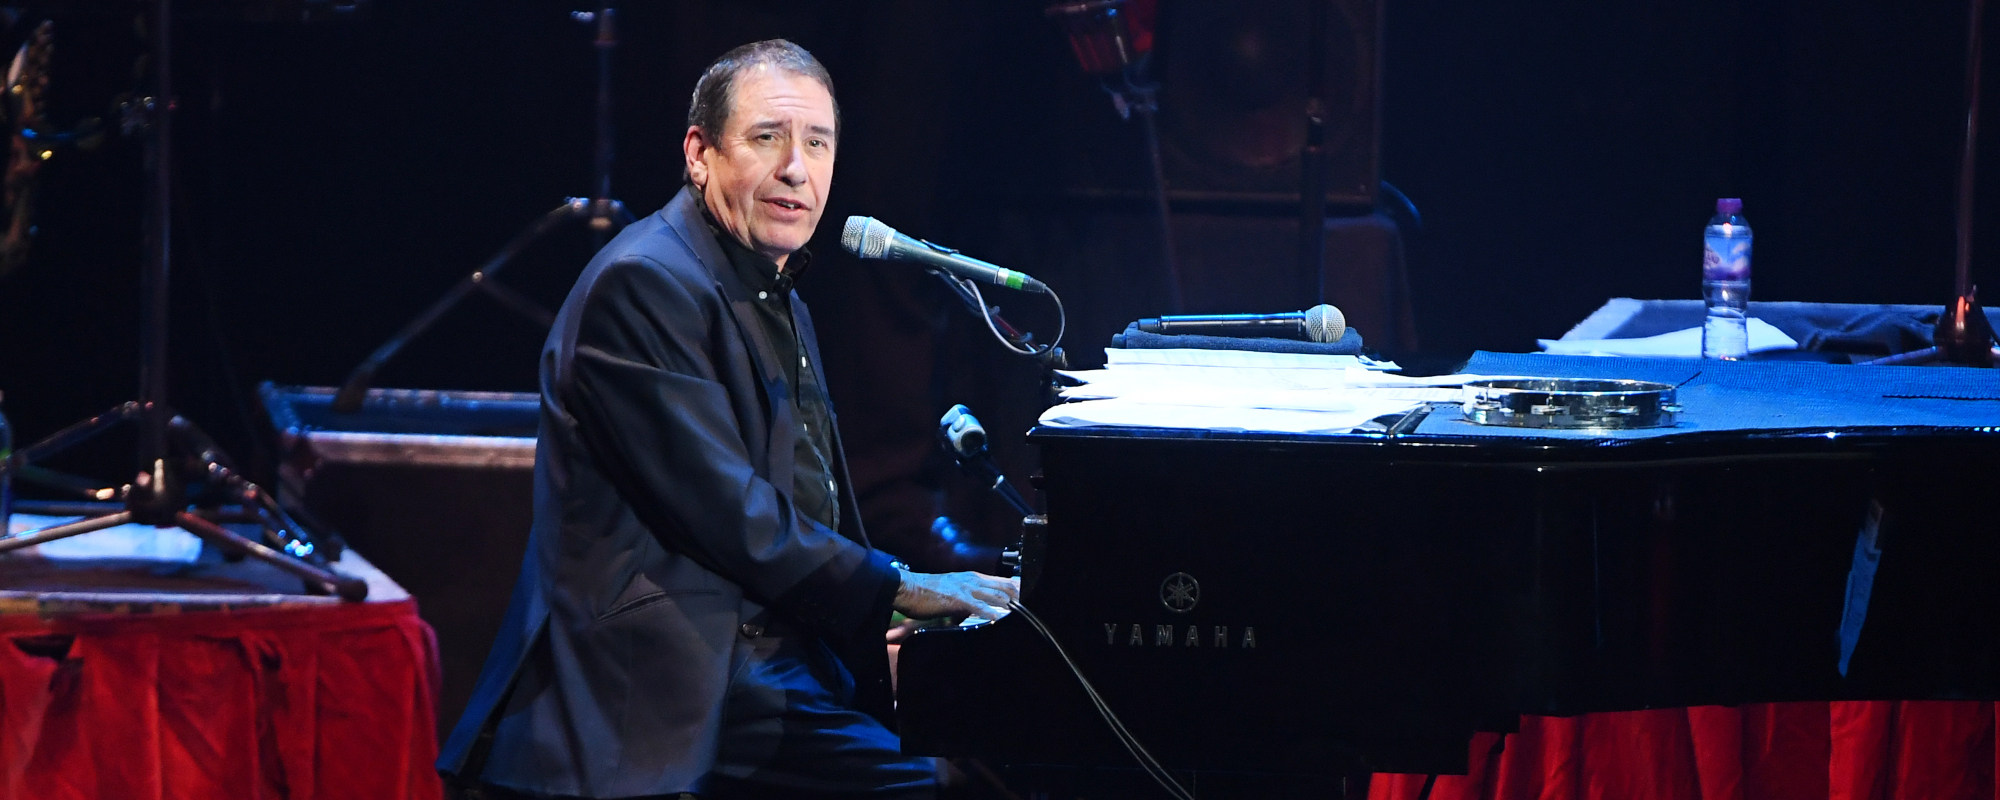 4 Memorable Jools Holland Keyboard Performances for Artists Other than Squeeze